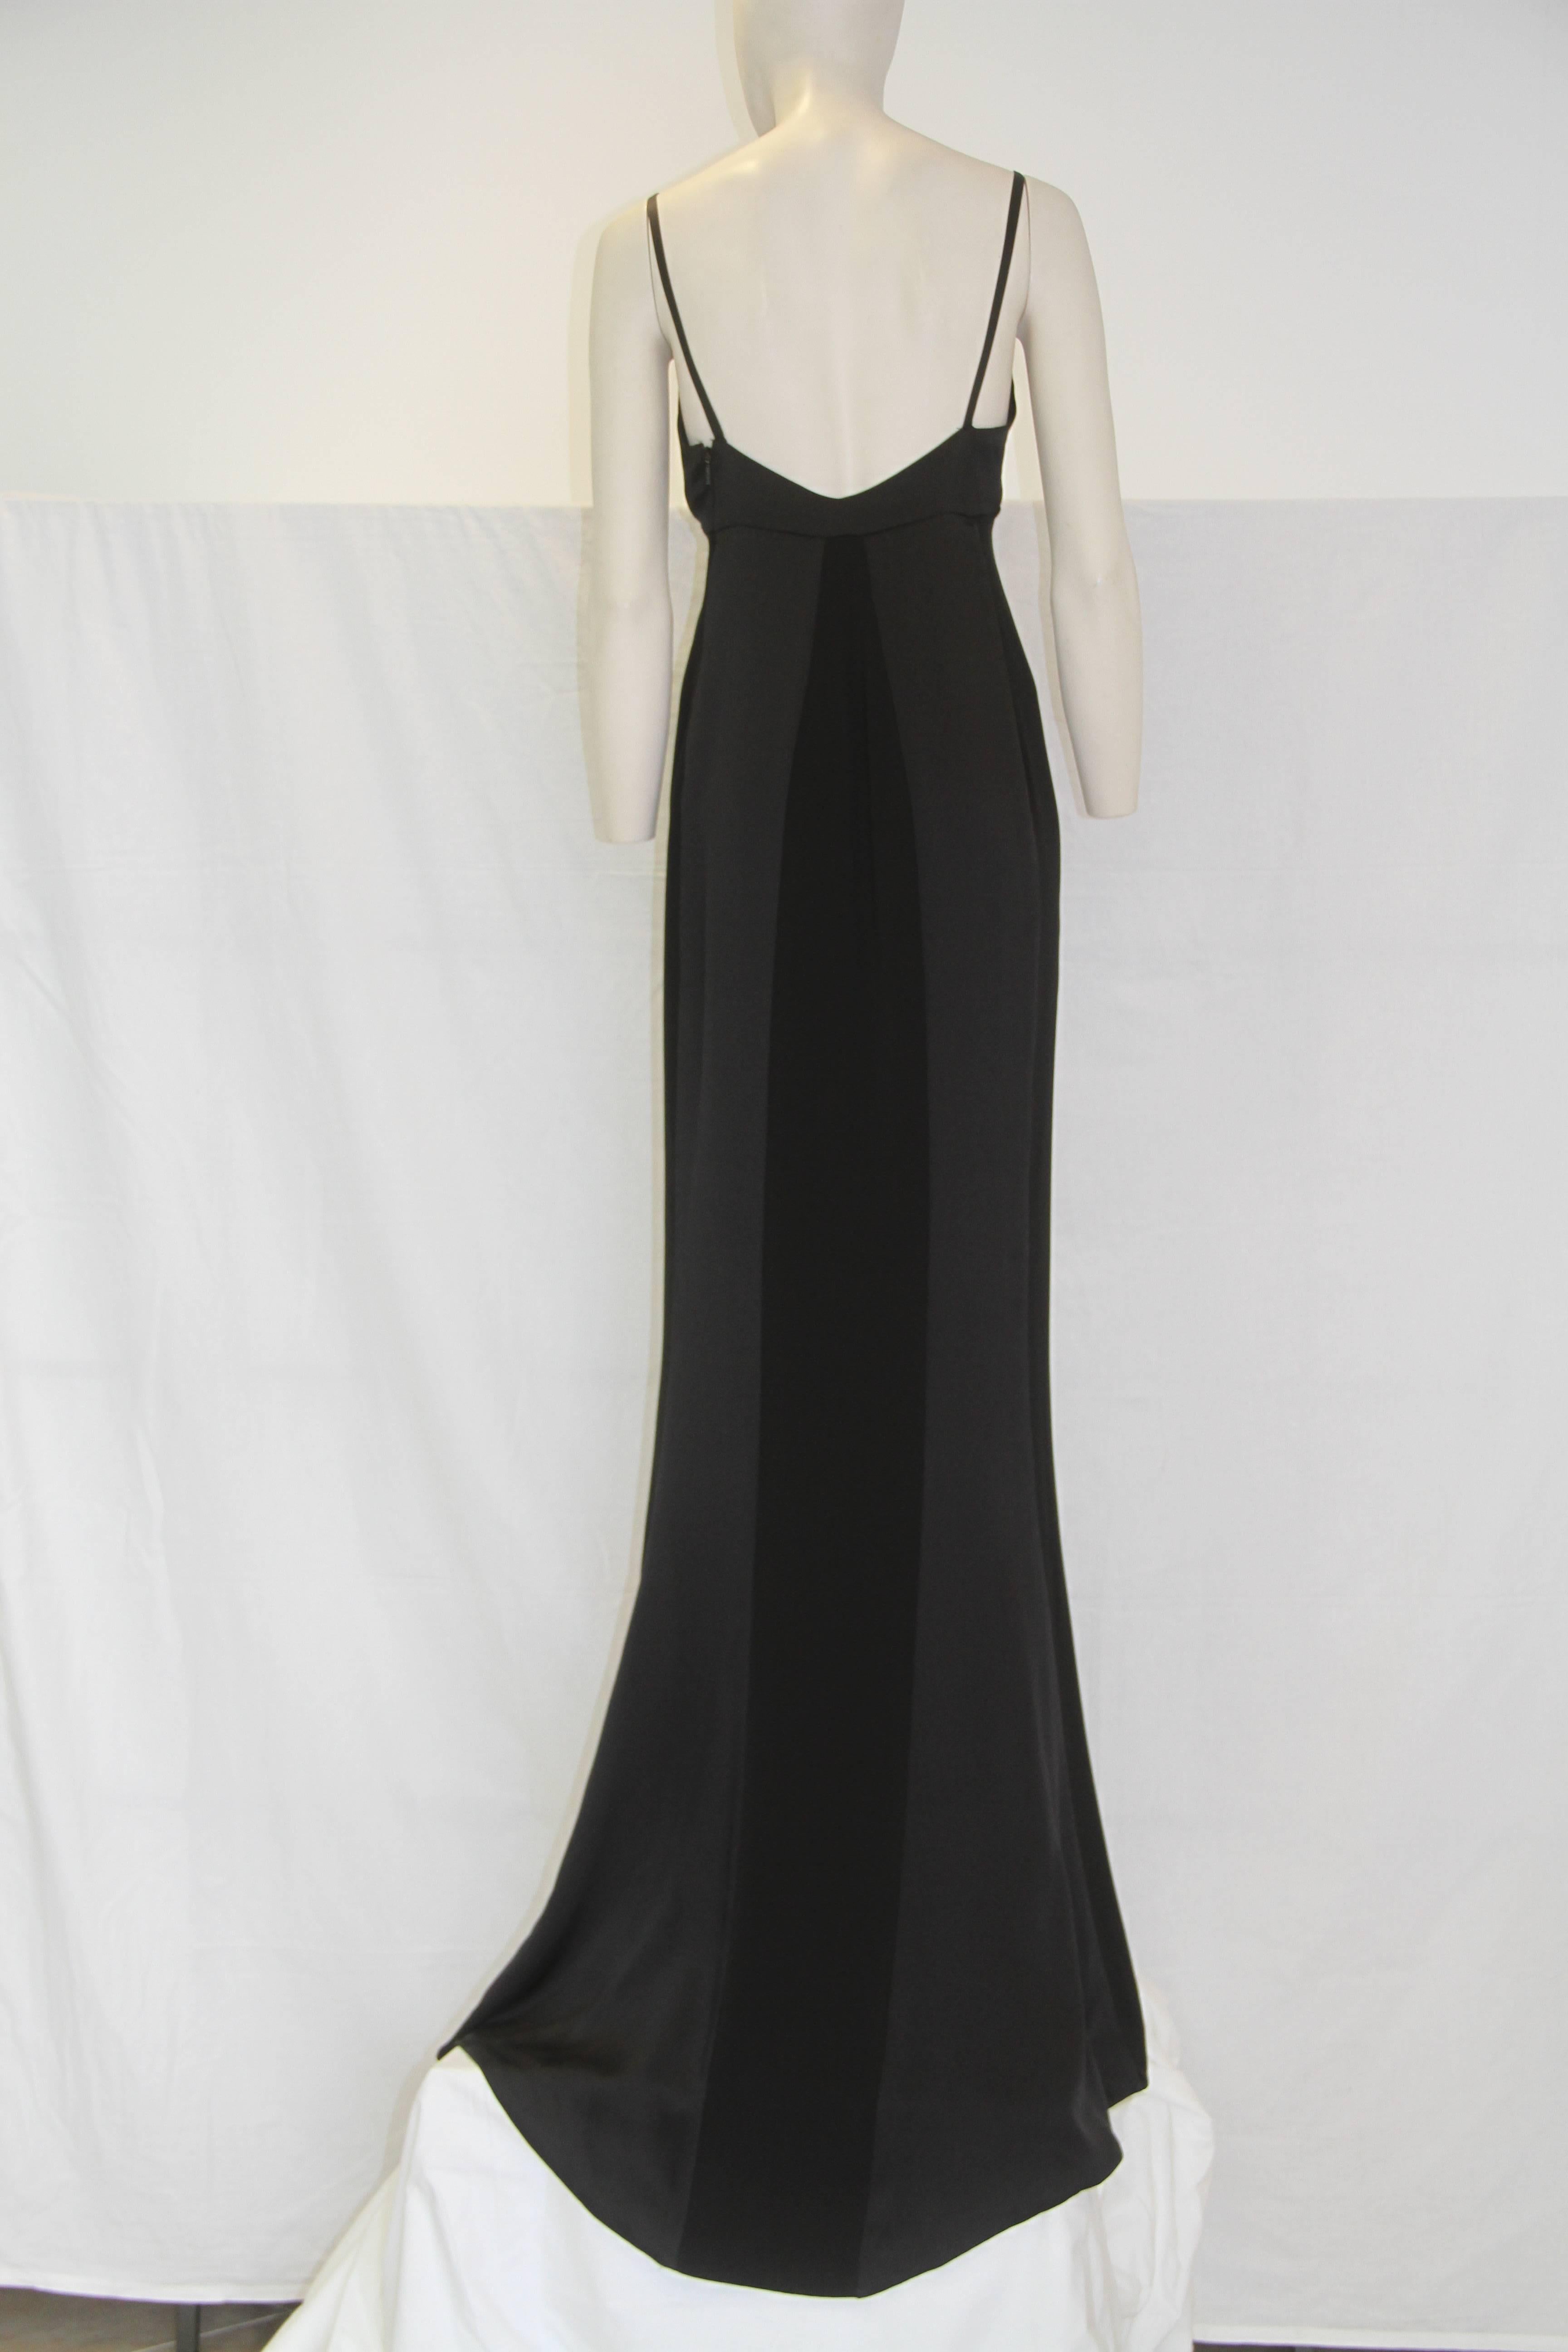 Tom Ford For Gucci black silk evening gown from 2001. Simply stunning and timeless, the gown features a silk satin bust and silk satin panel detailing to the back.

Marked an Italian size 42. However, the gown runs small and the fit is closer to